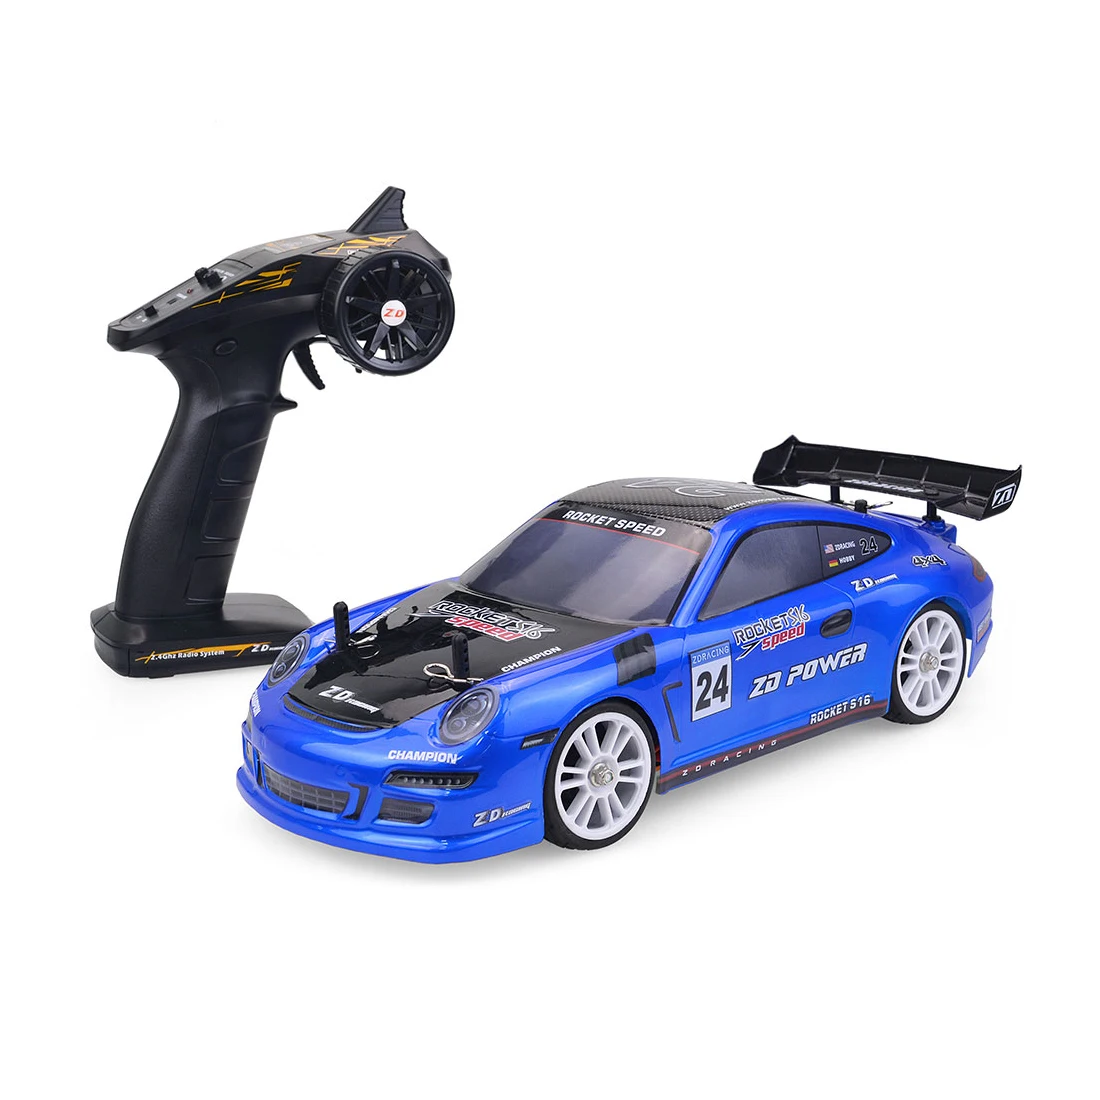 

ZD Racing S16 1/16 2.4GHz 4WD High Speed Electric Remote Control Vehicle RTR 60km/h LED Brushless RC Racing Car Drift Car Toy